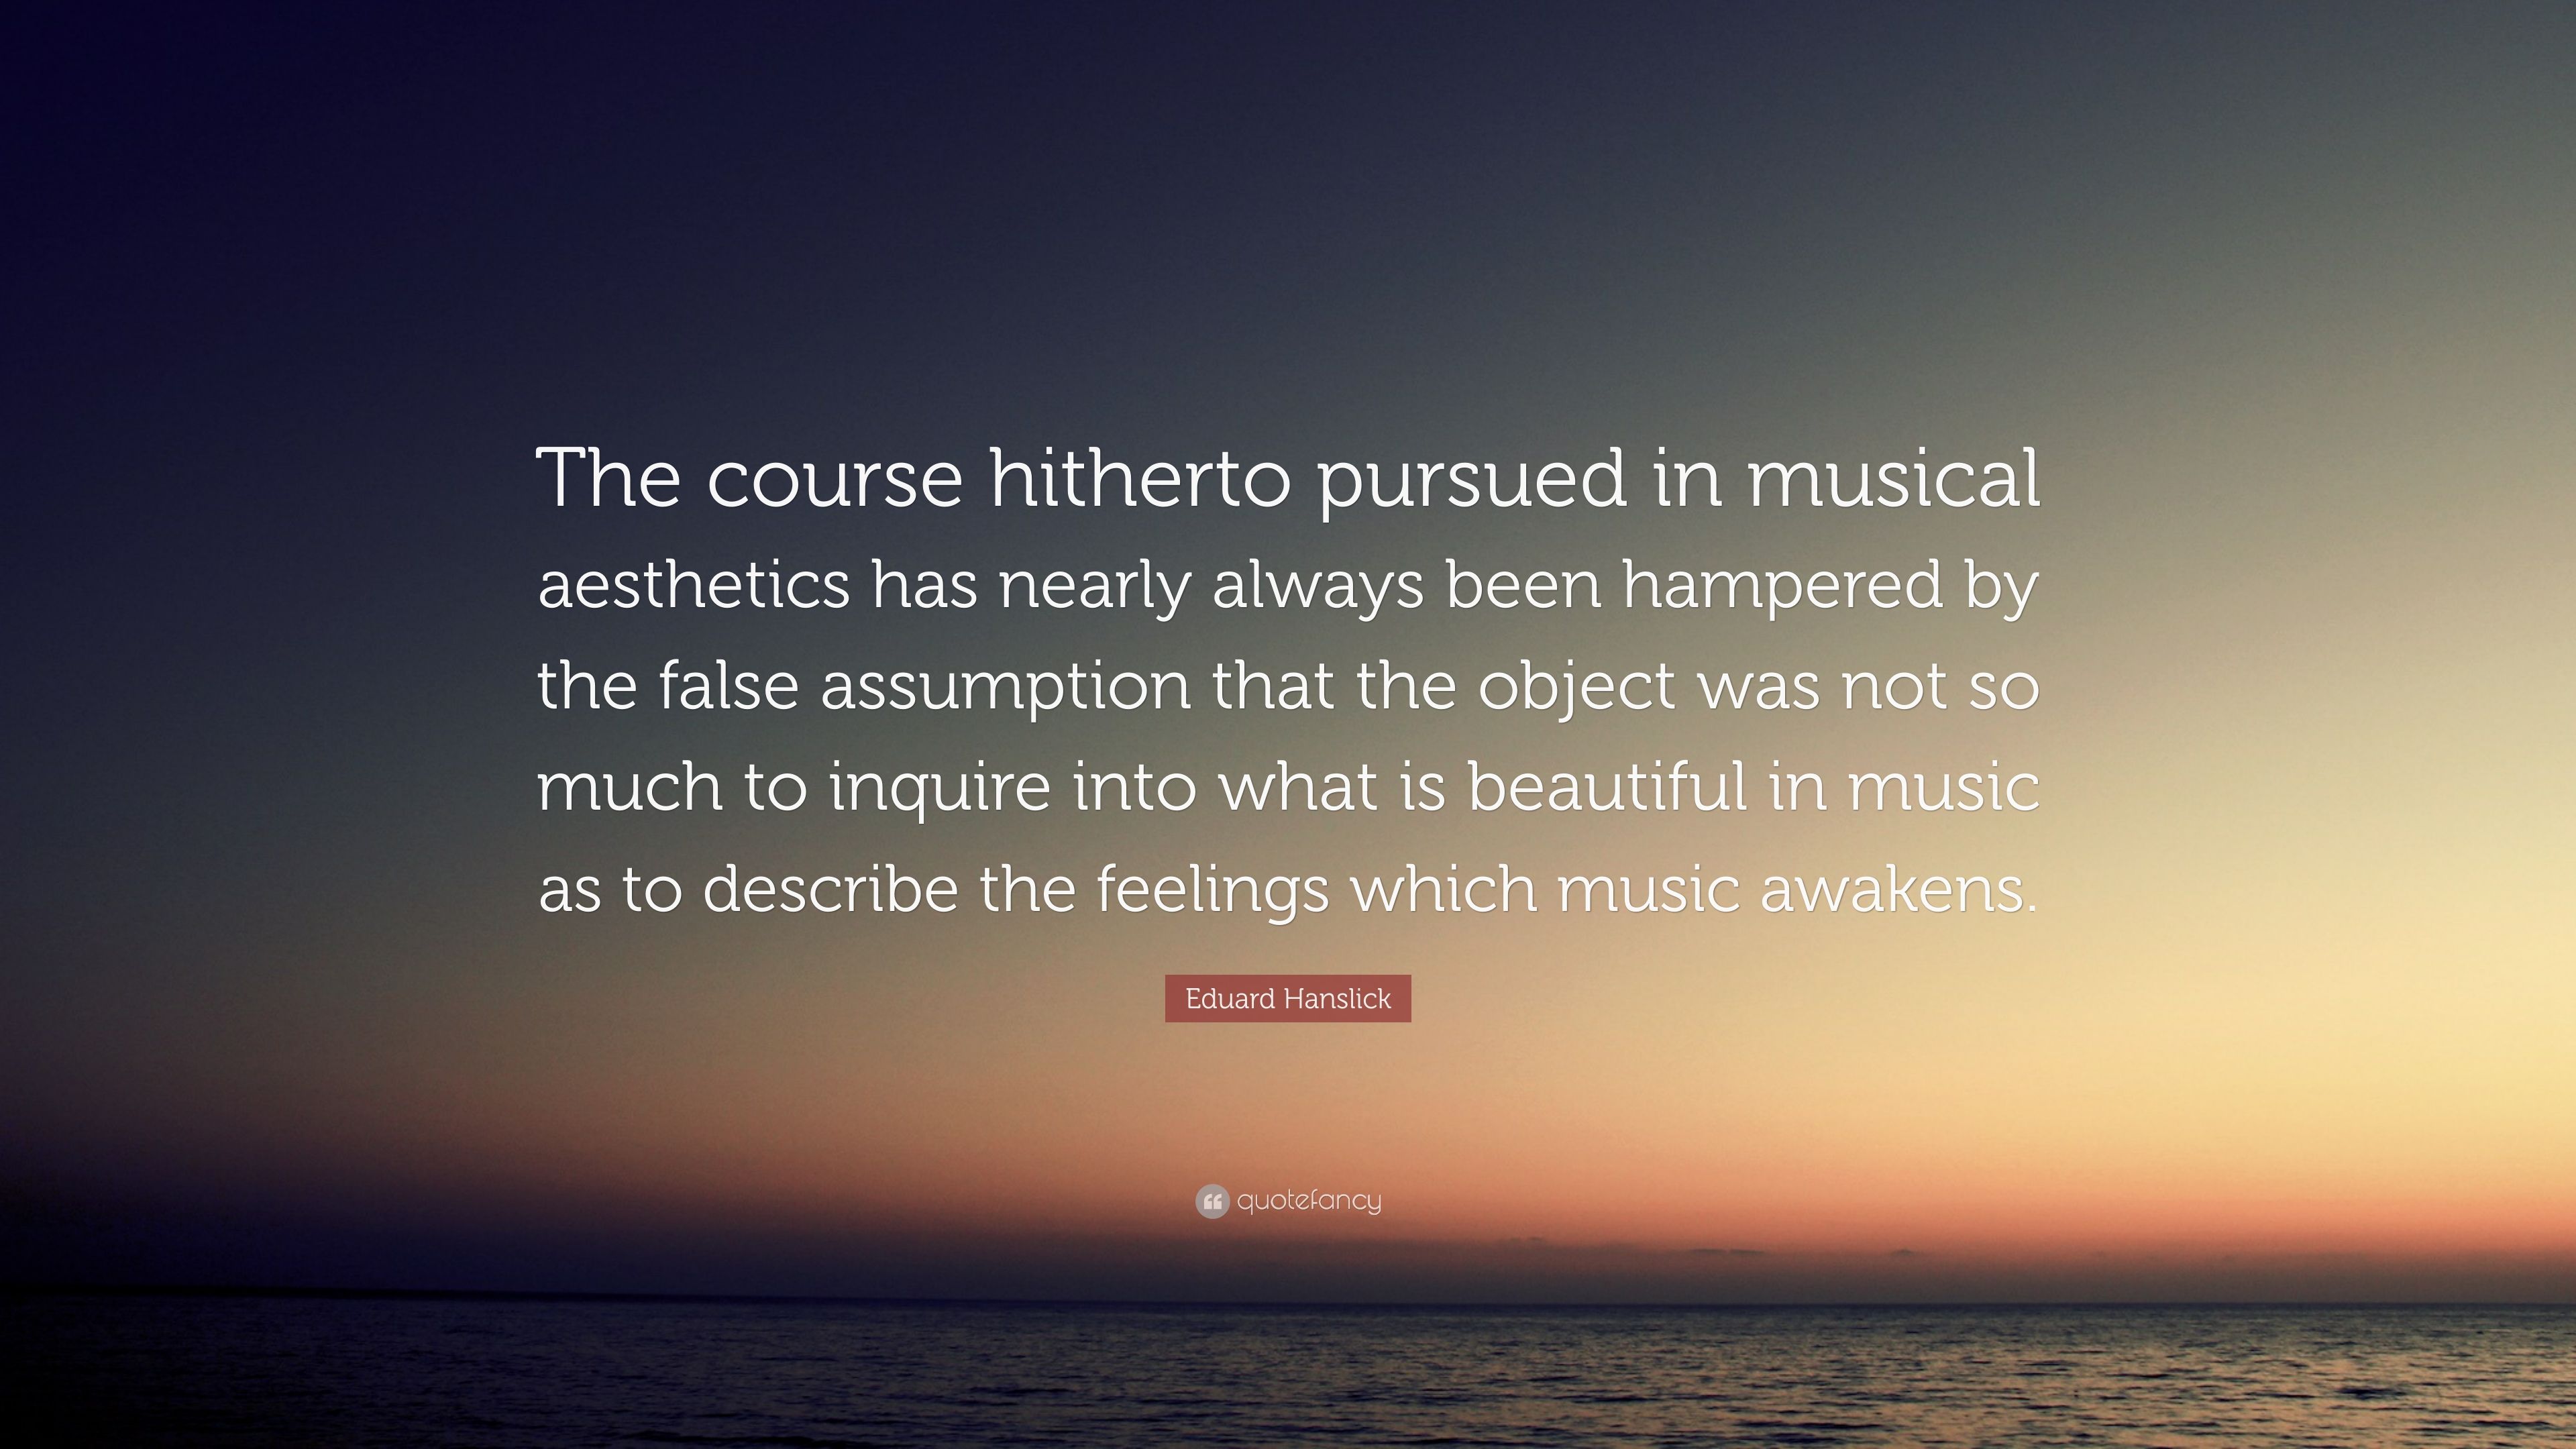 Eduard Hanslick Quote: “The course hitherto pursued in musical